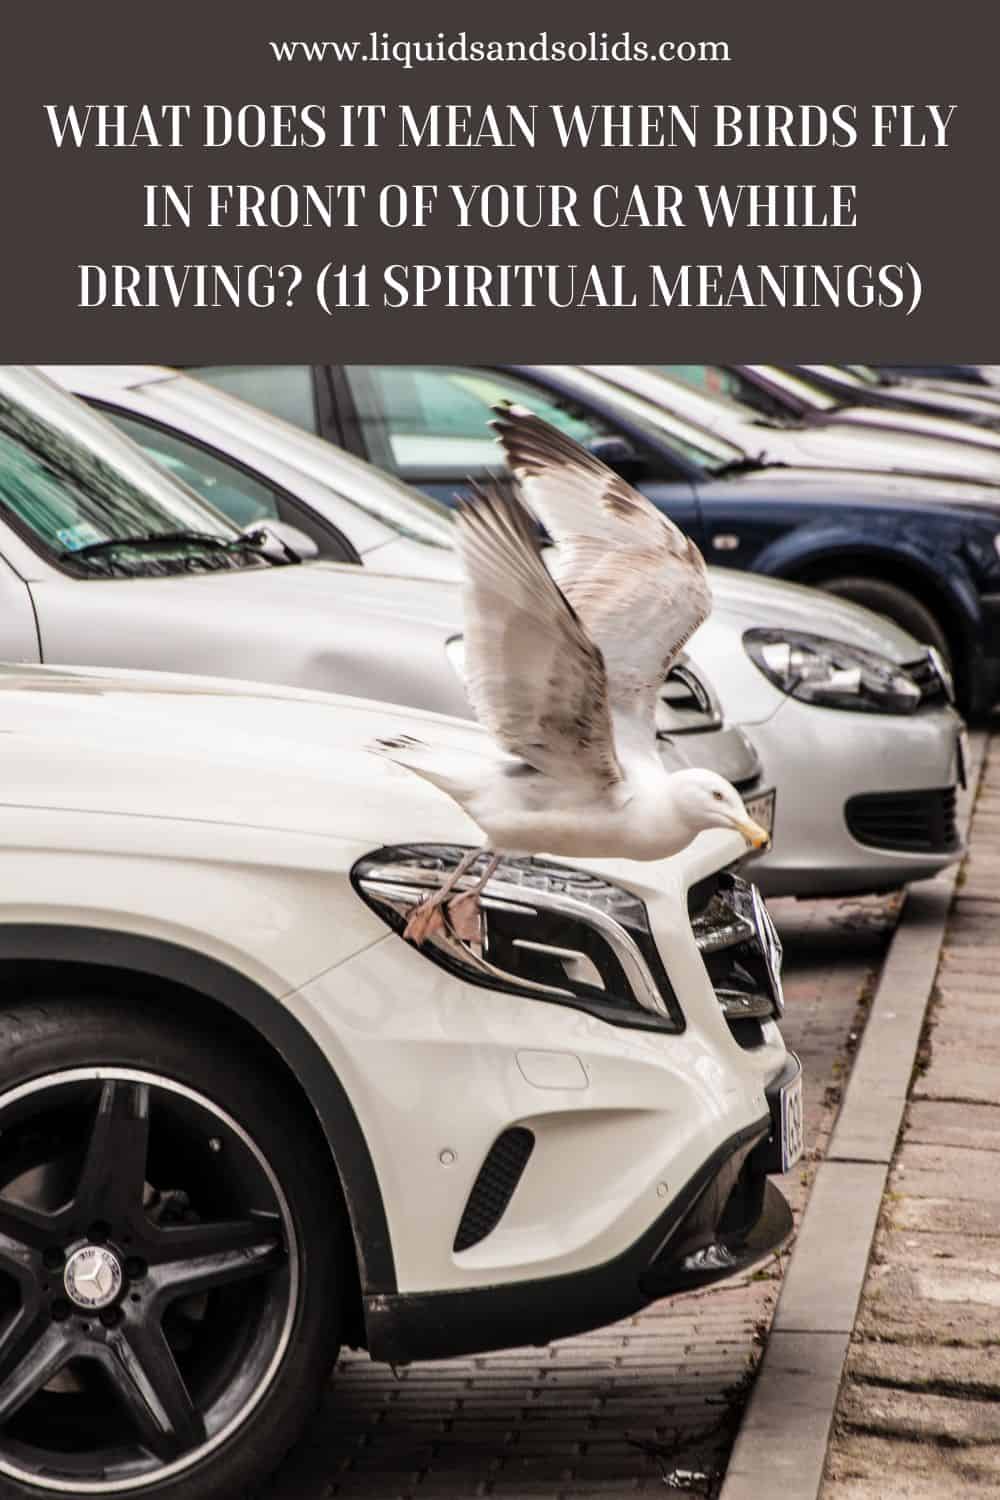 What Does It Mean When Birds Fly In Front Of Your Car While Driving? (11 Spiritual Meanings)